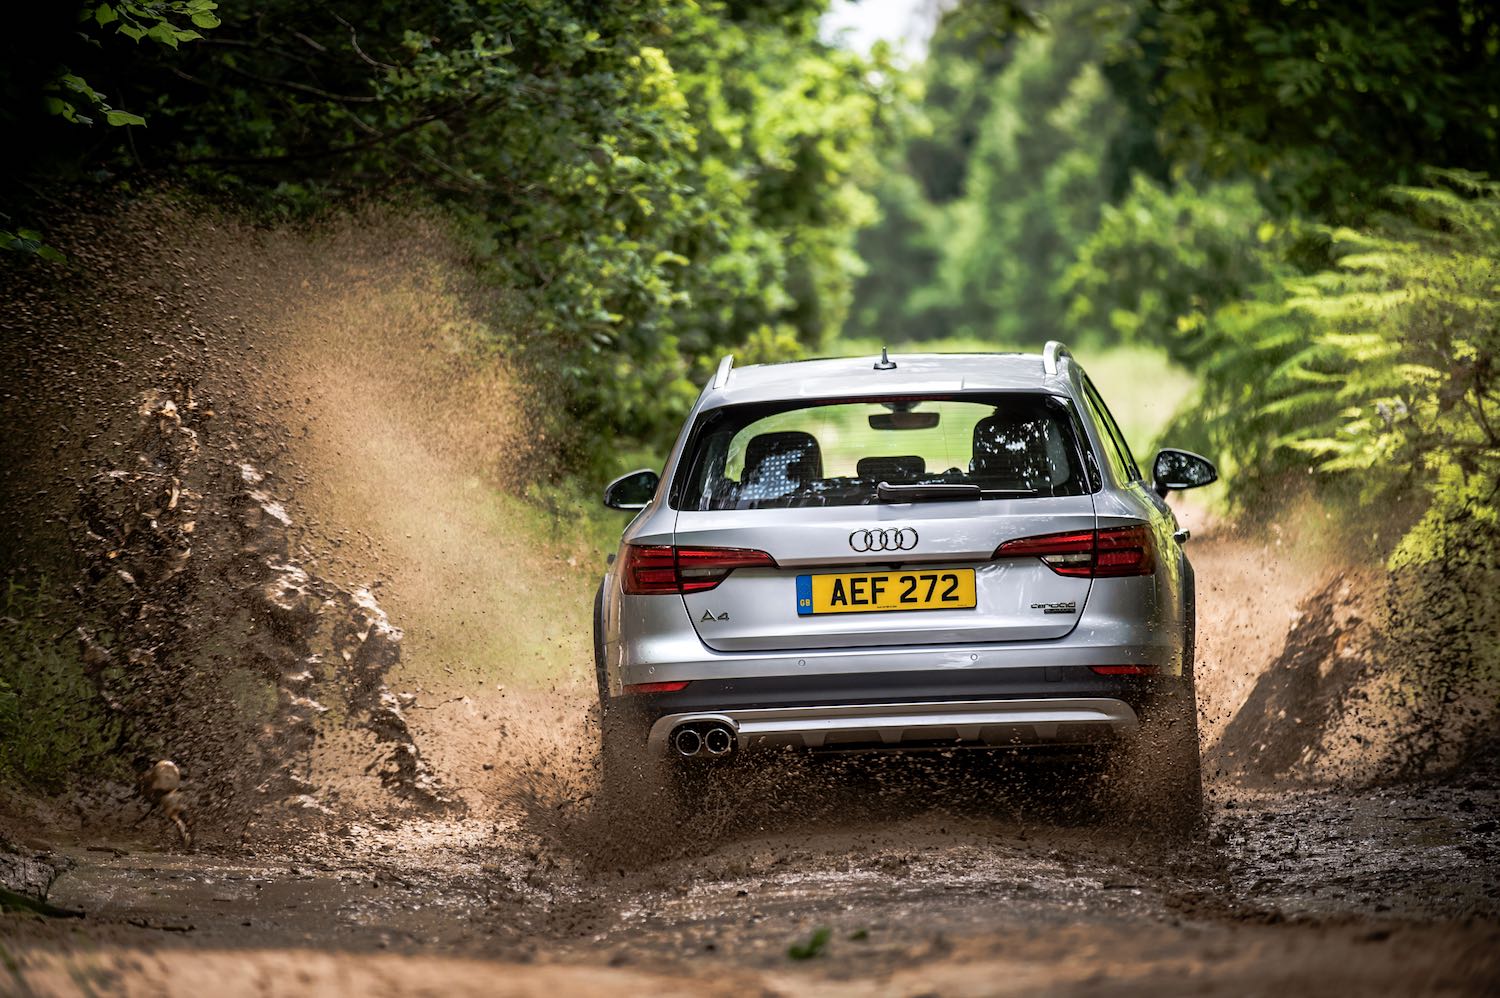 Neil Lyndon reviews the Audi Allroad for drive-10